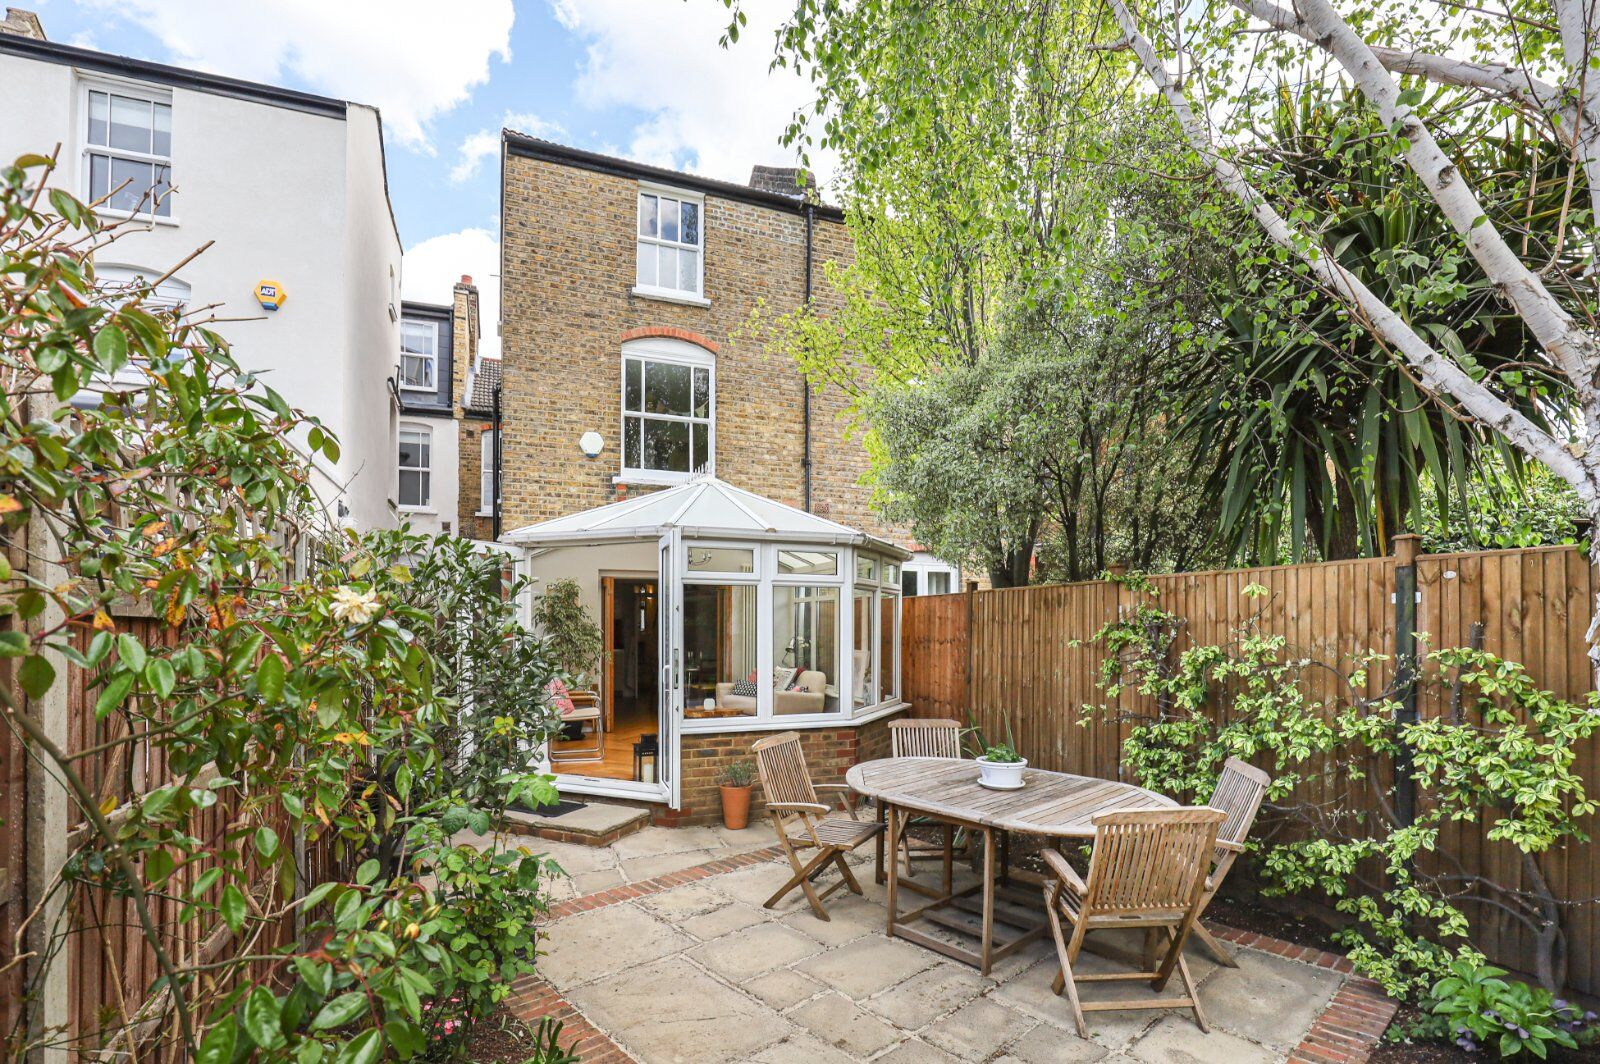 2 bedroom mid terraced house for sale Gladstone Road, Wimbledon, SW19, main image